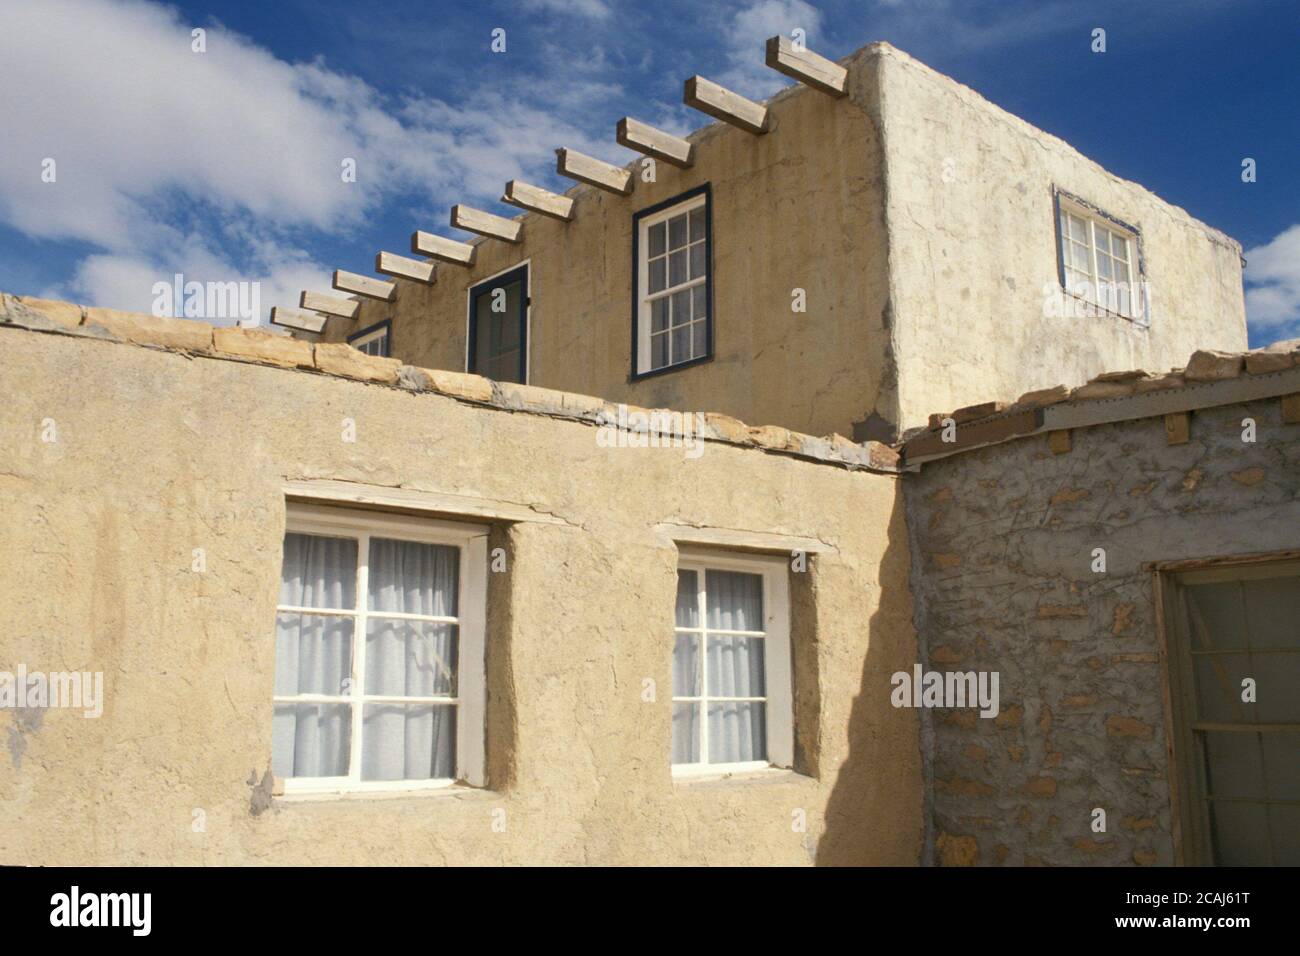 Acoma Pueblo, New Mexico USA, 1993: Acoma 'Sky City,' 500-year-old community is the oldest continuously inhabited settlement in North America. Built atop a mesa, the isolated village has no utilities available. ©Bob Daemmrich Stock Photo